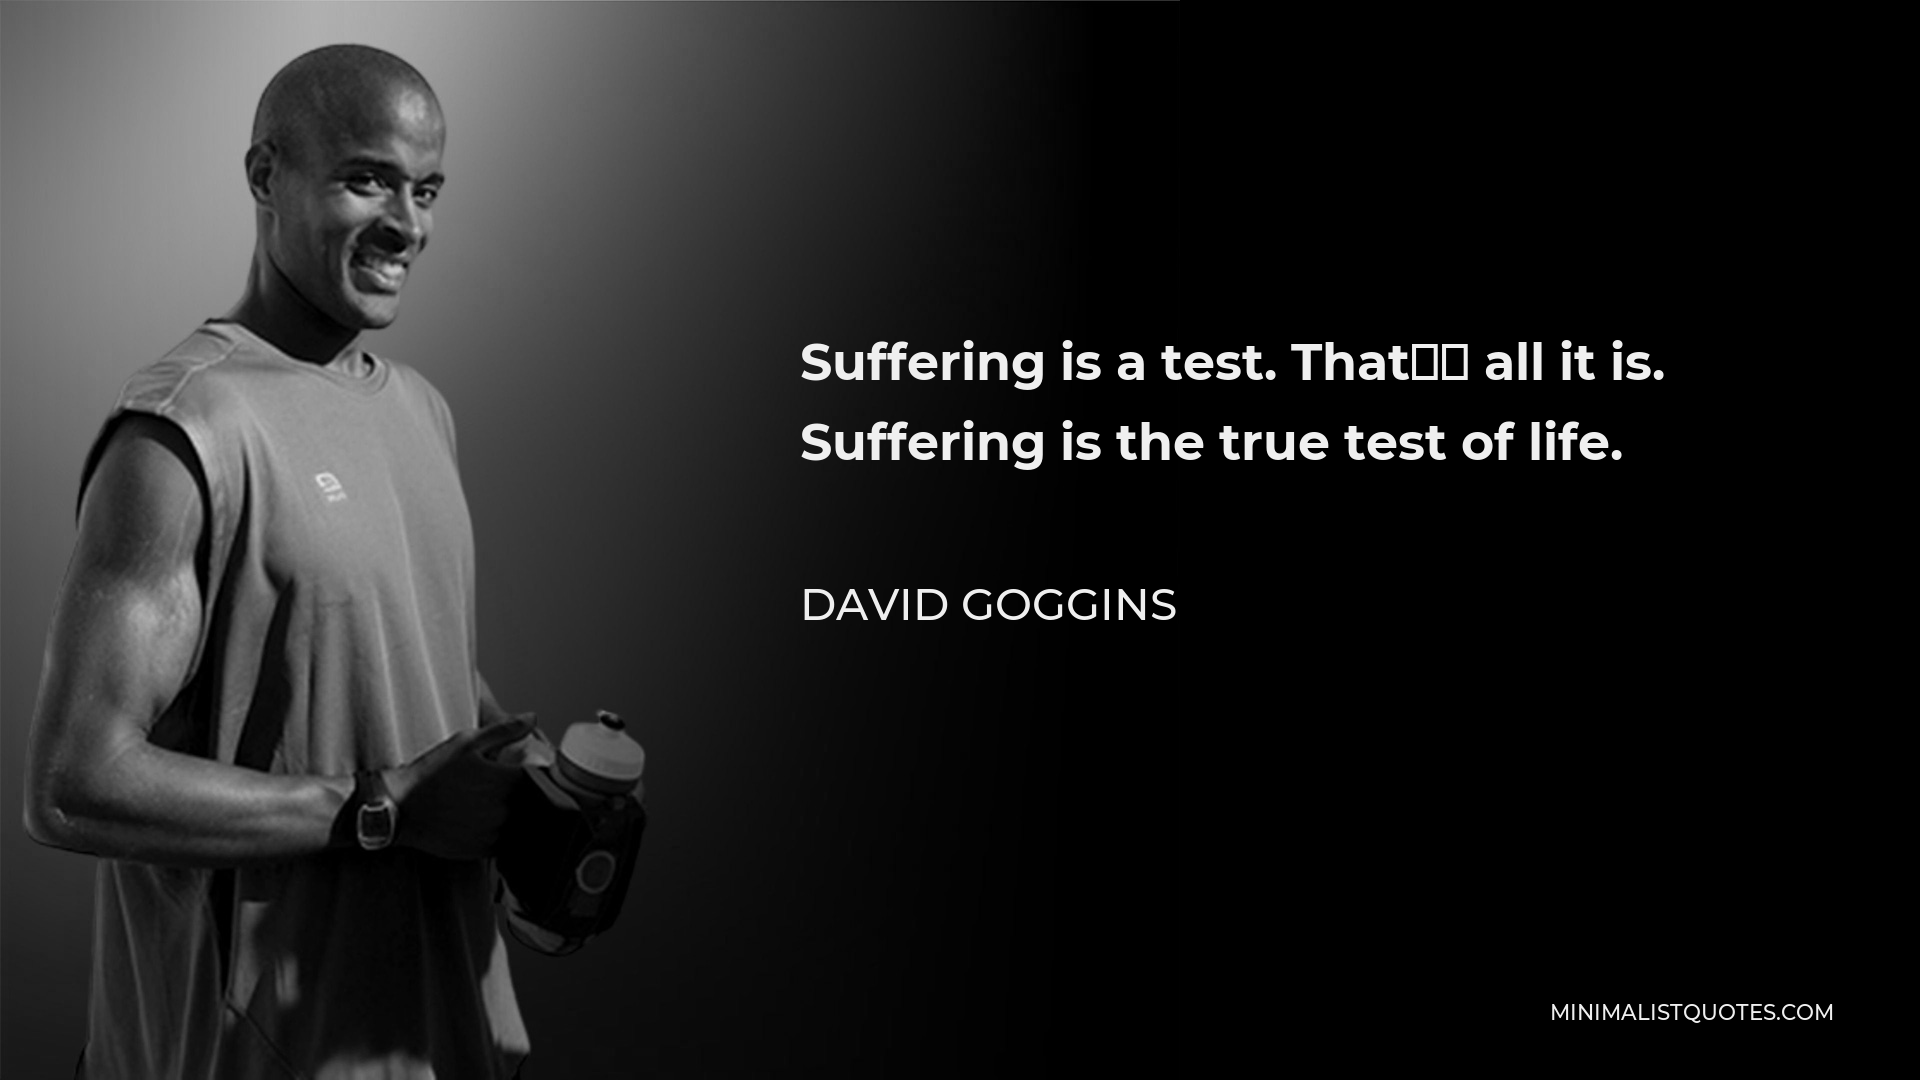 David Goggins Quote: Suffering is a test. That's all it is. Suffering is  the true test of life.